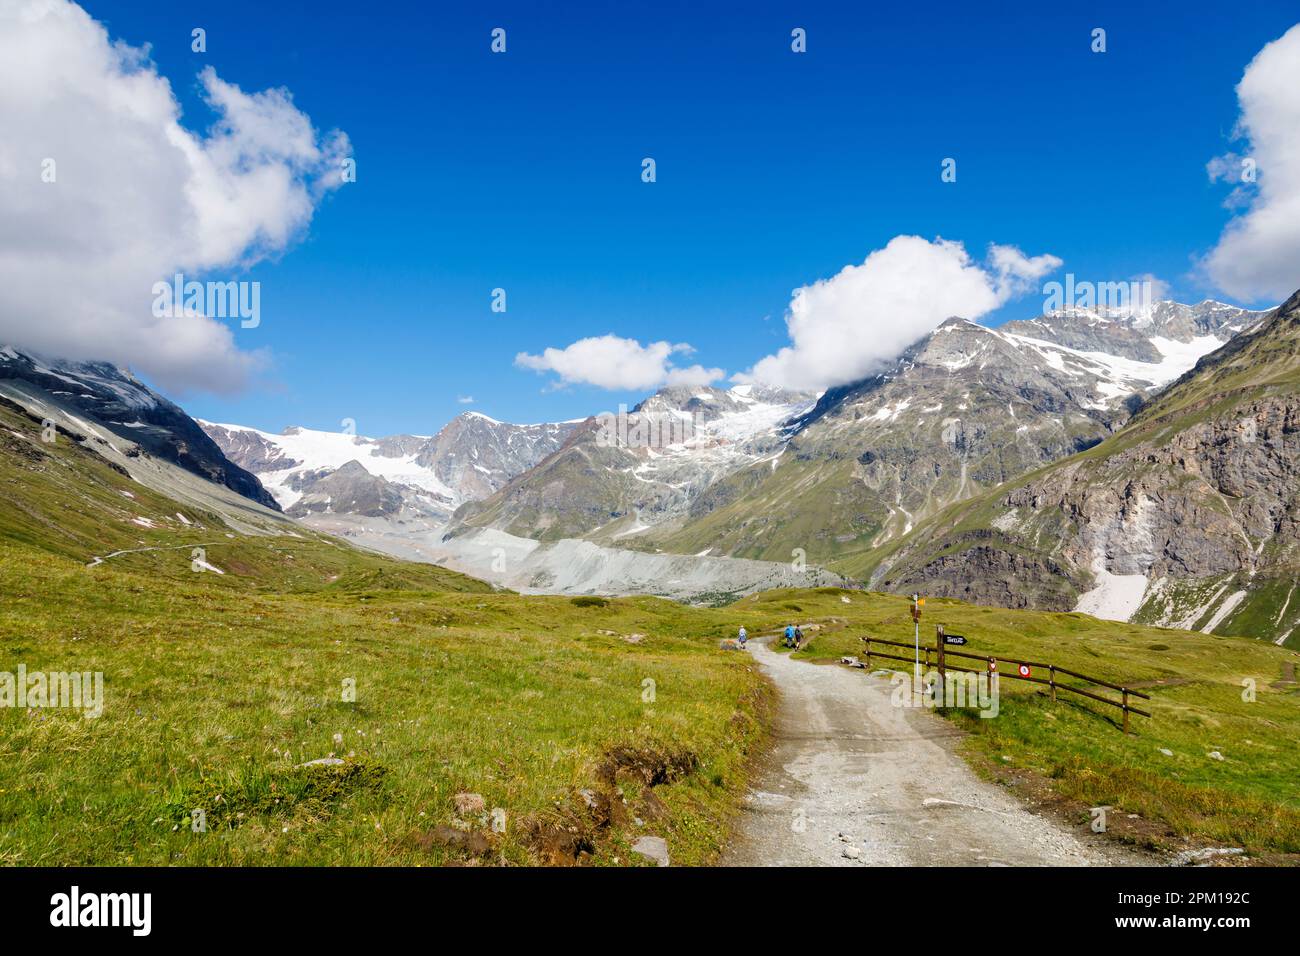 Panoramic mountain view of walking country at Stafelalp on the Matterhorn Trail from Zermatt Schwarzsee above Zermatt on a sunny day with blue sky Stock Photo